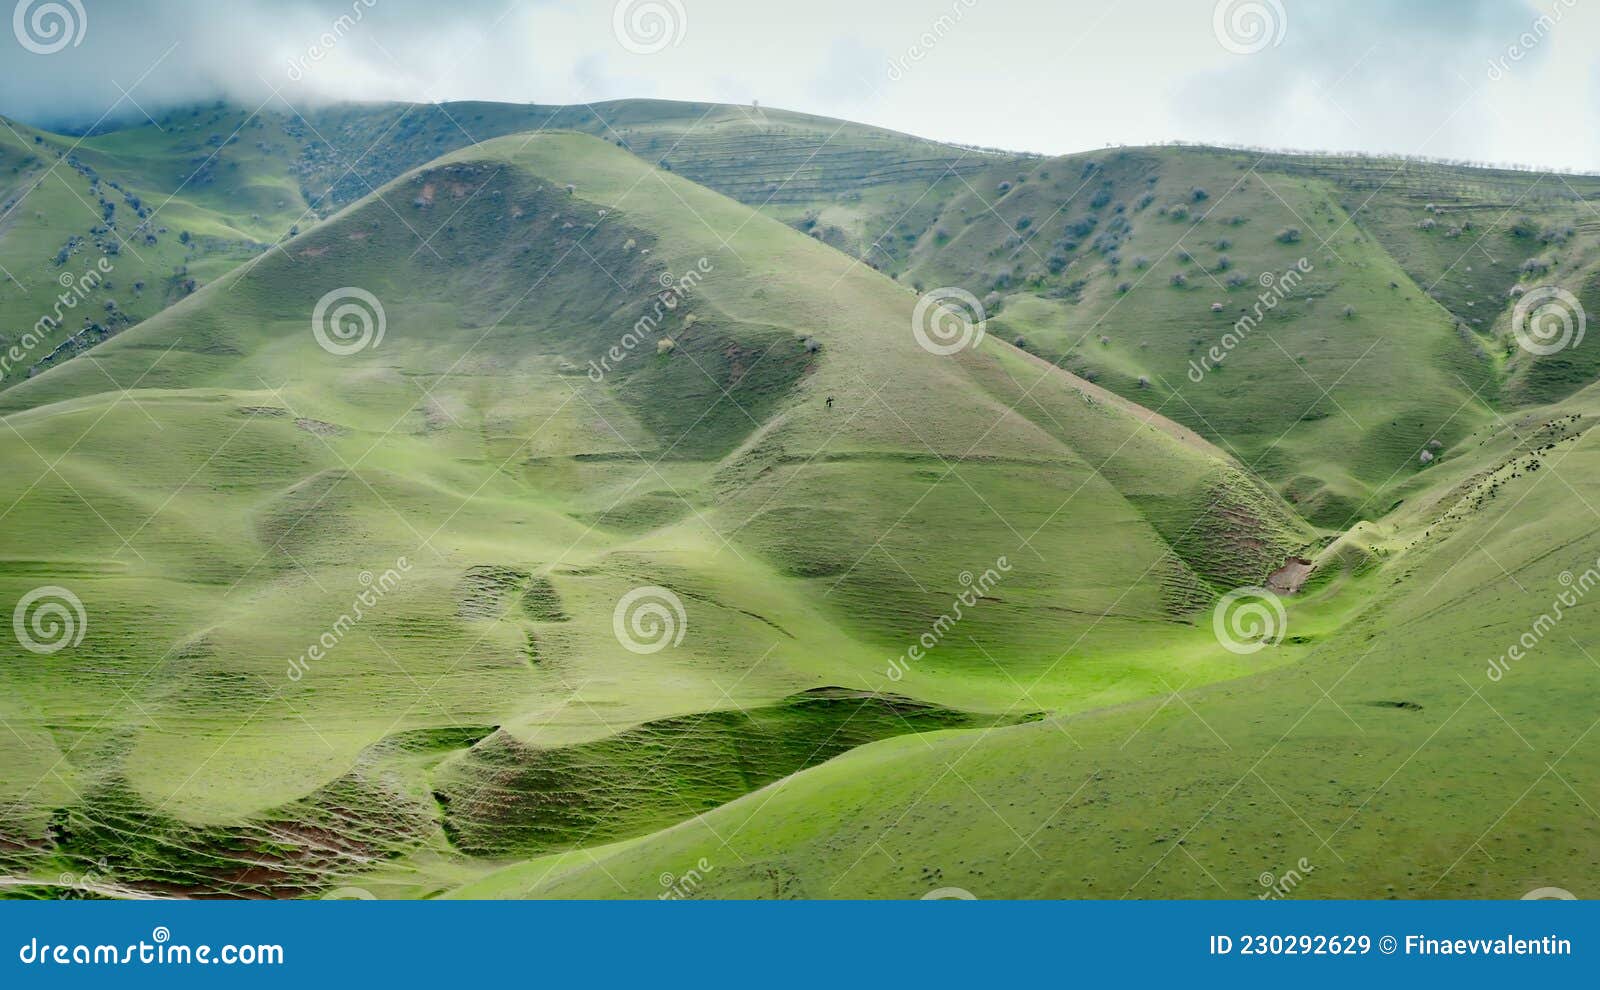 An Aerial Landscape With A Green Mountain Range On Which Small Animals